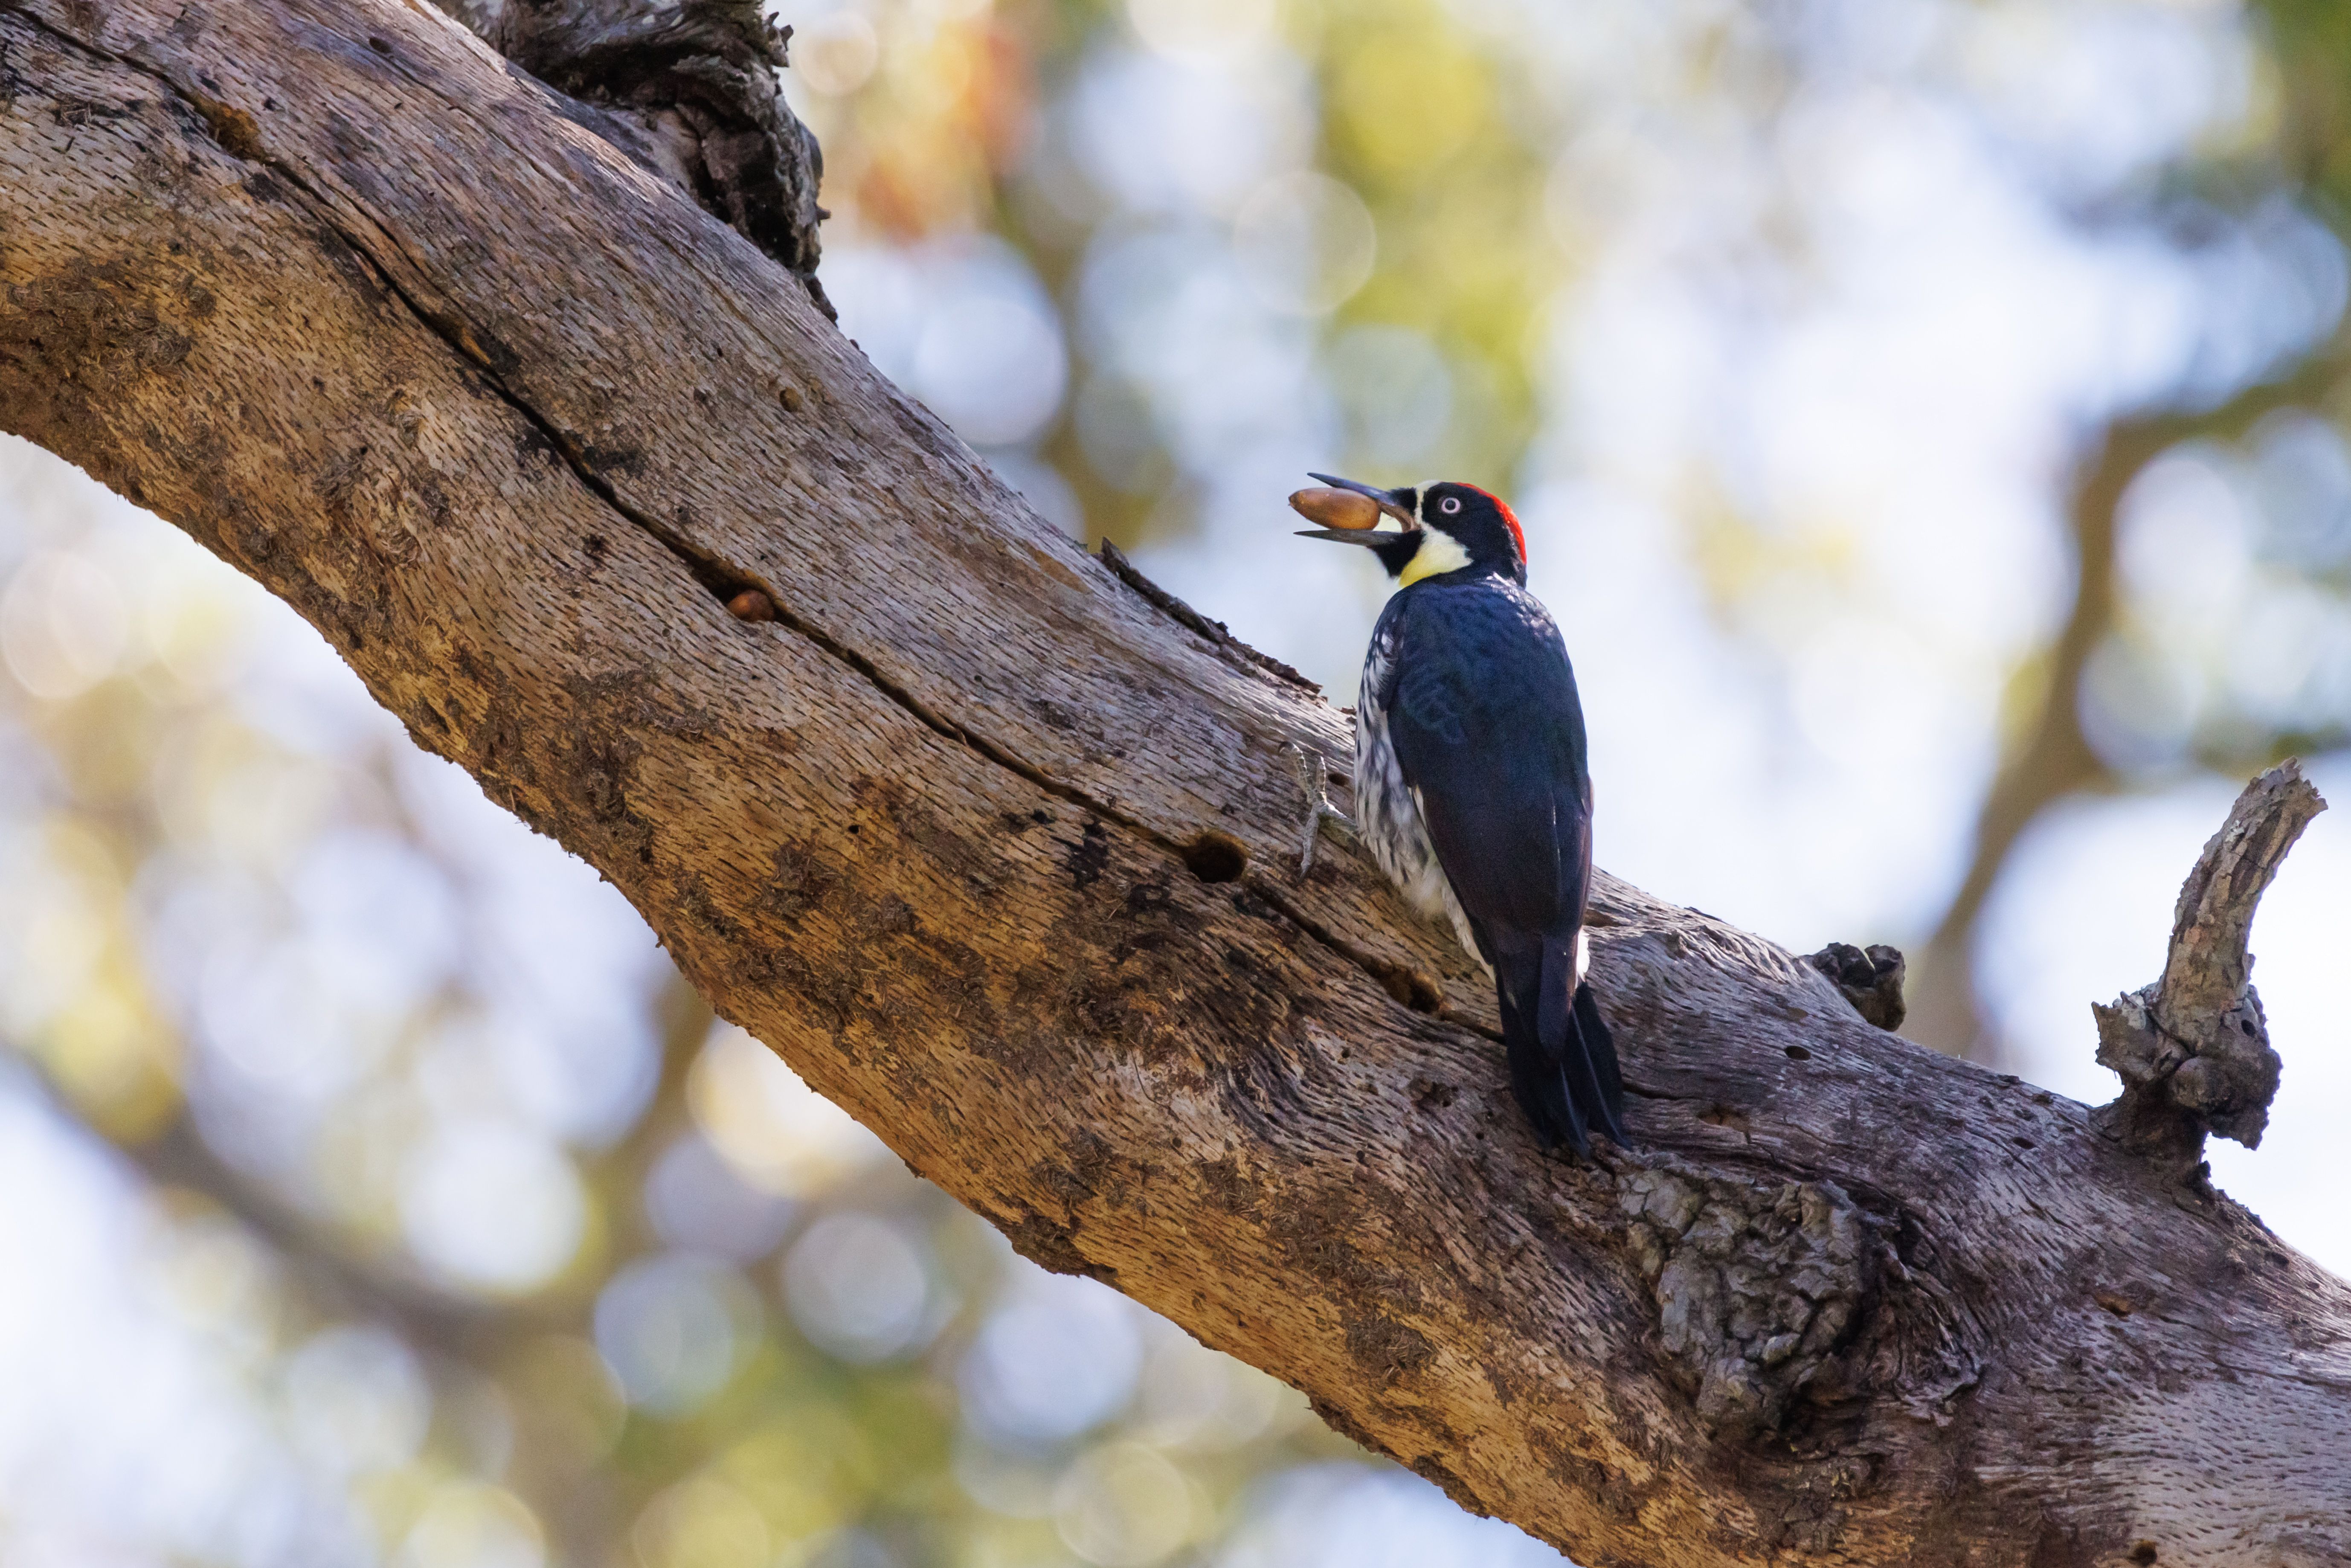 A woodpecker with an acorn in its mouth sits in atree.